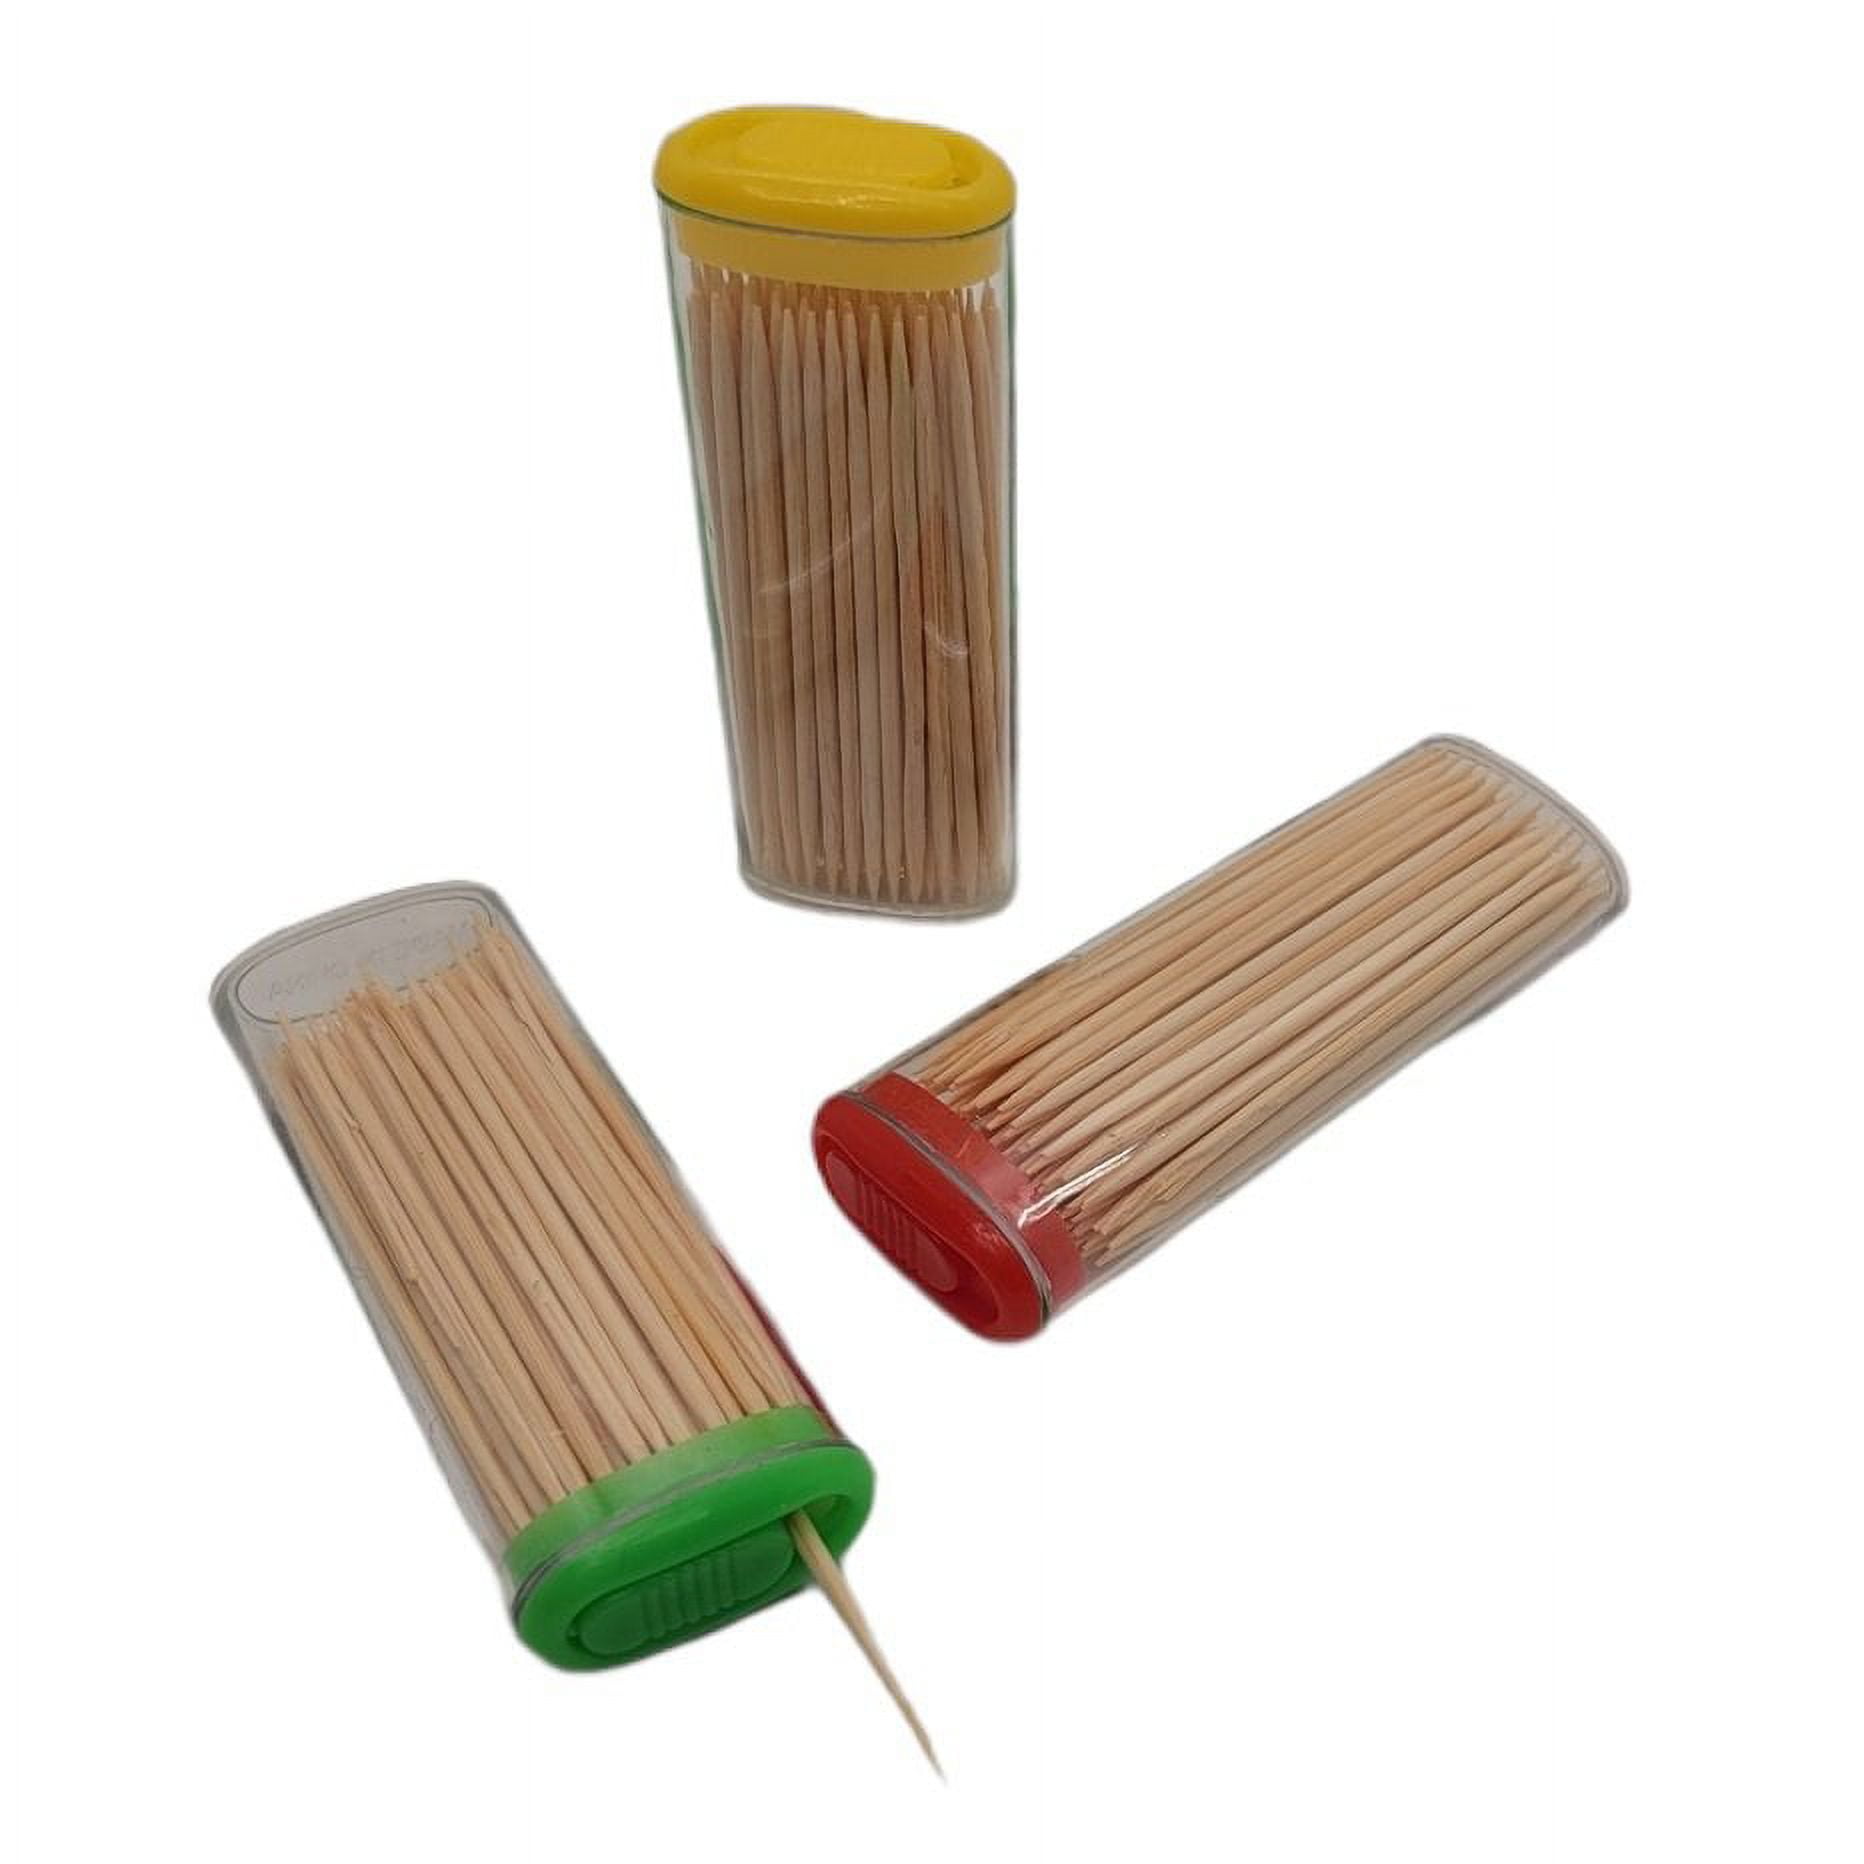 Wooden Portable Wooden Pocket Toothpick Holder Container Pocket Dispenser  For Sewing Needles And Toothpicks LX6228 From Sunnytech, $0.8